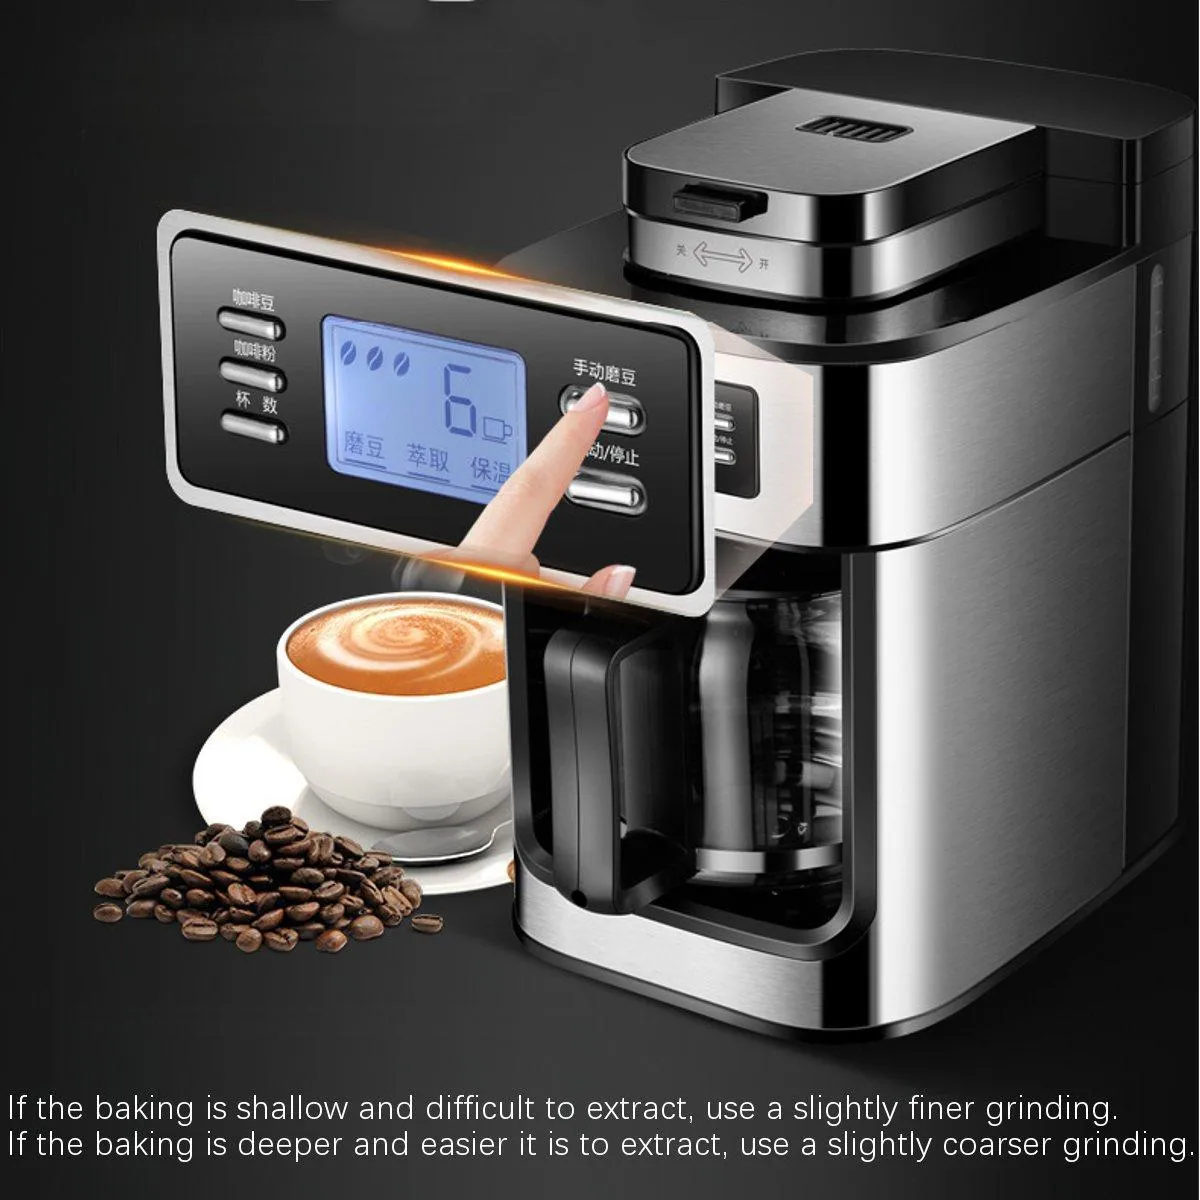 100% New Brand Electric Coffee Maker Machine Household Fully-Automatic Drip Coffee Maker 1200ml Tea Coffee Pot Home Kitchen Appliance 220V